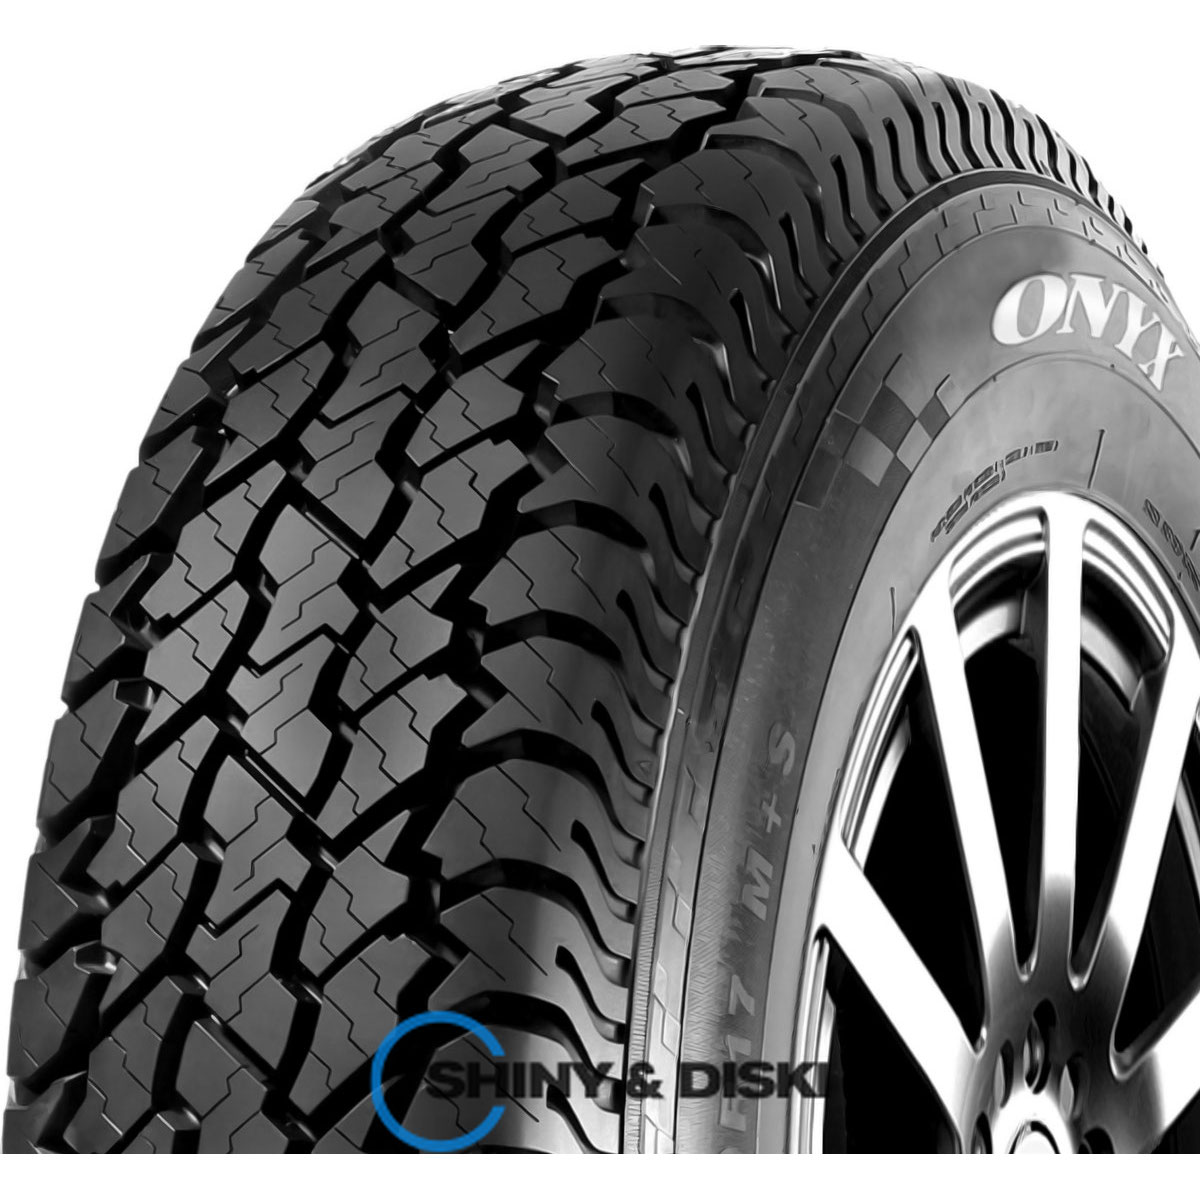 покришки onyx ny-at187 225/75 r16 115/112s